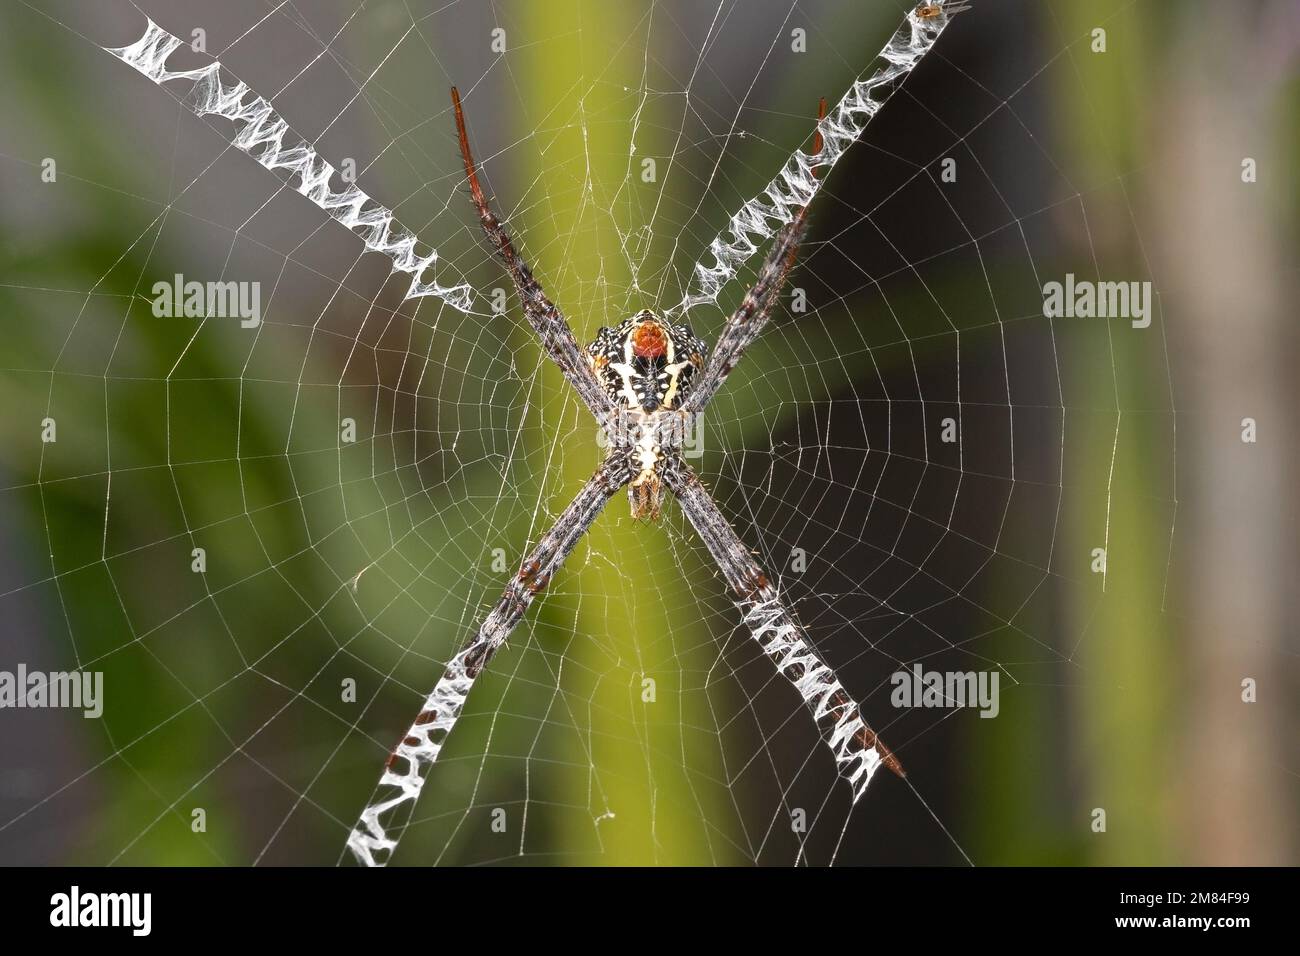 Macro photography of spider on the web. Stock Photo